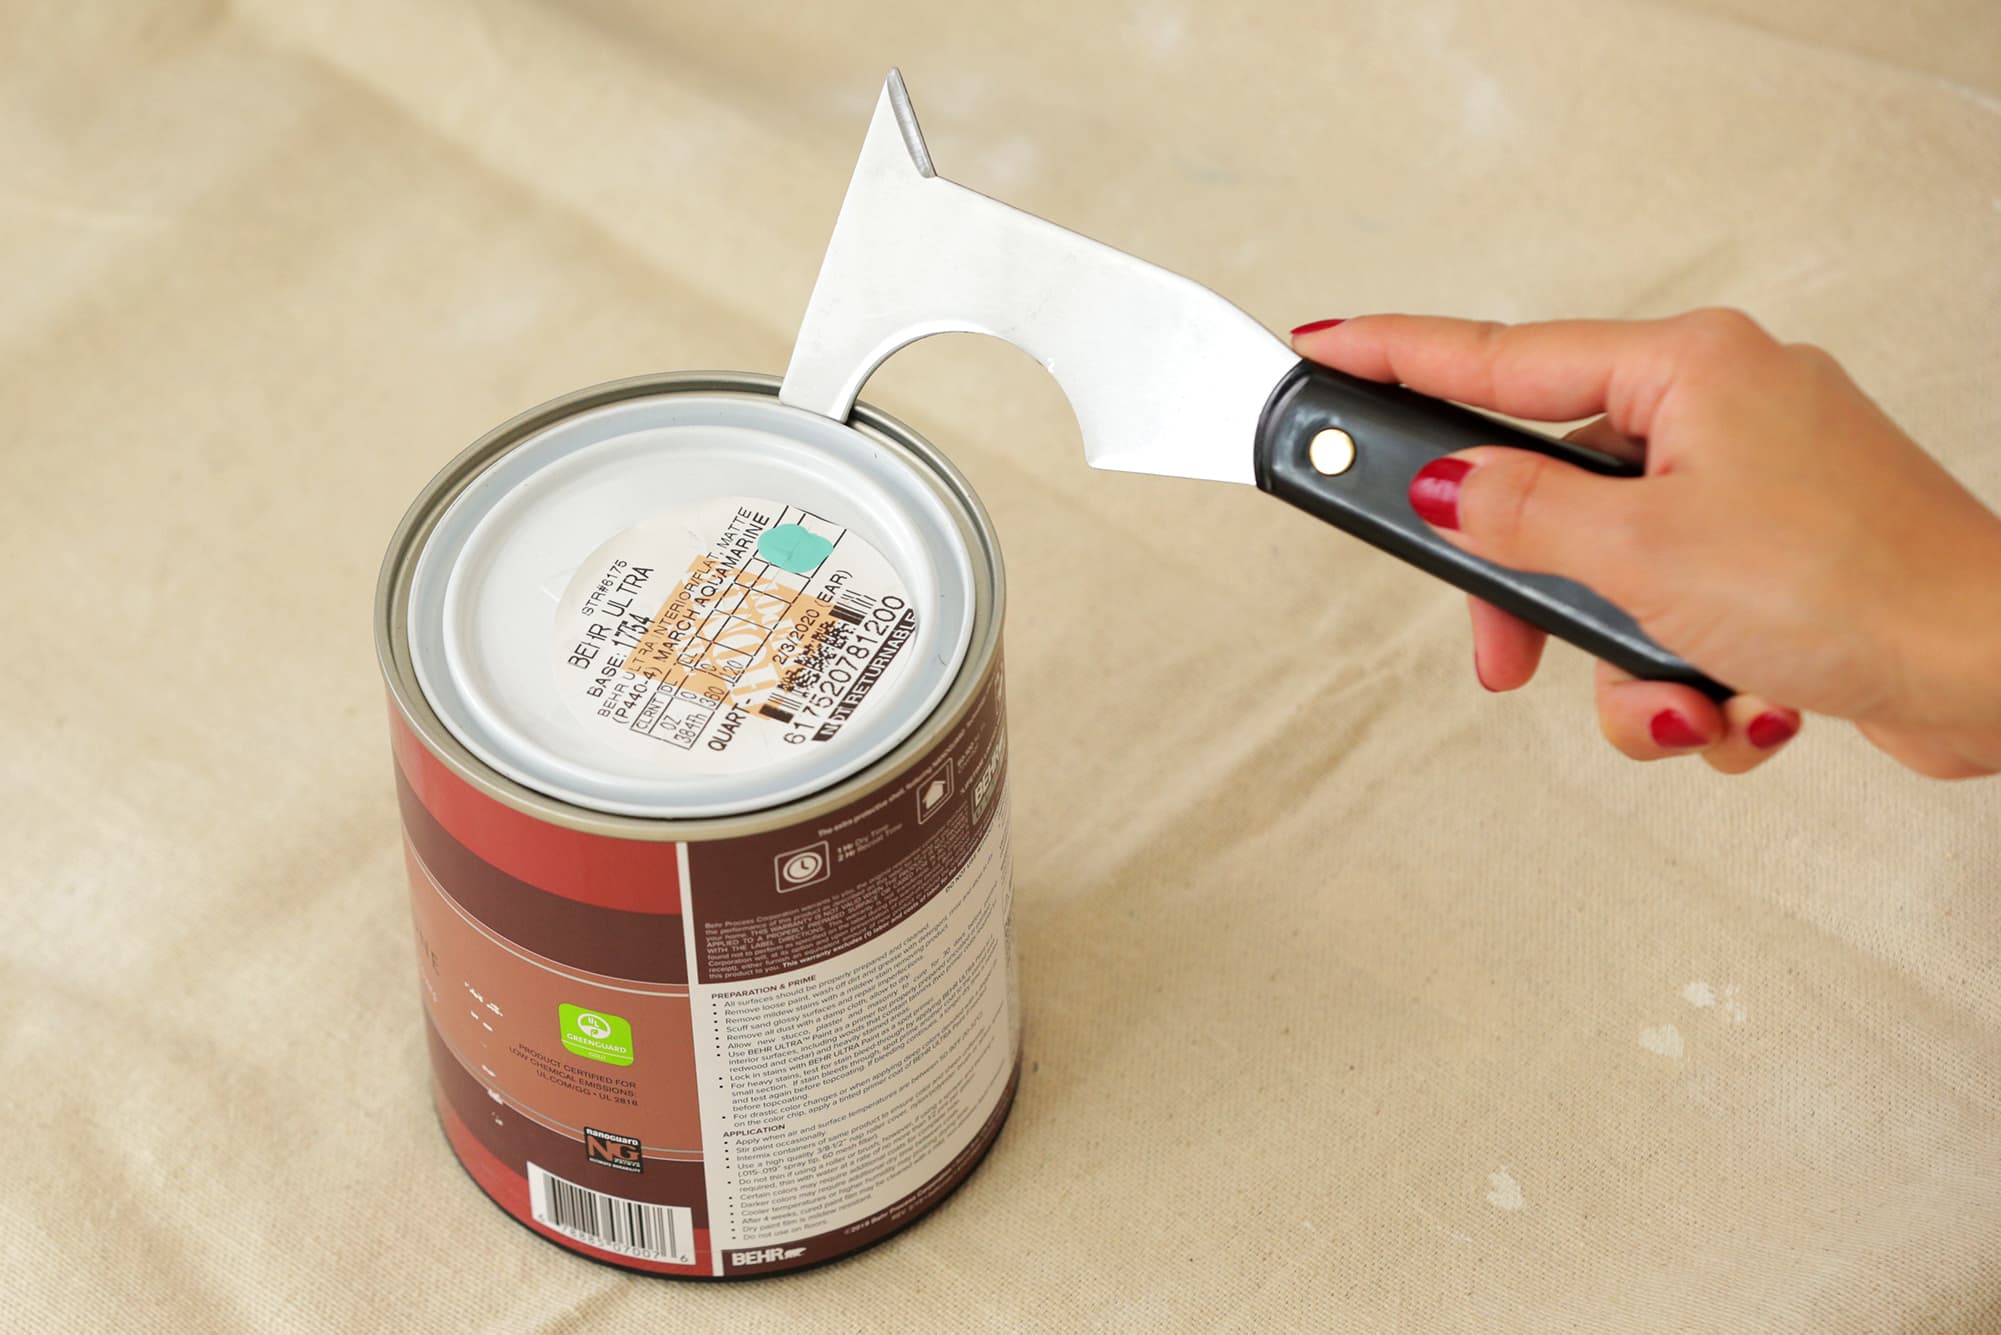 Paint Can Openers